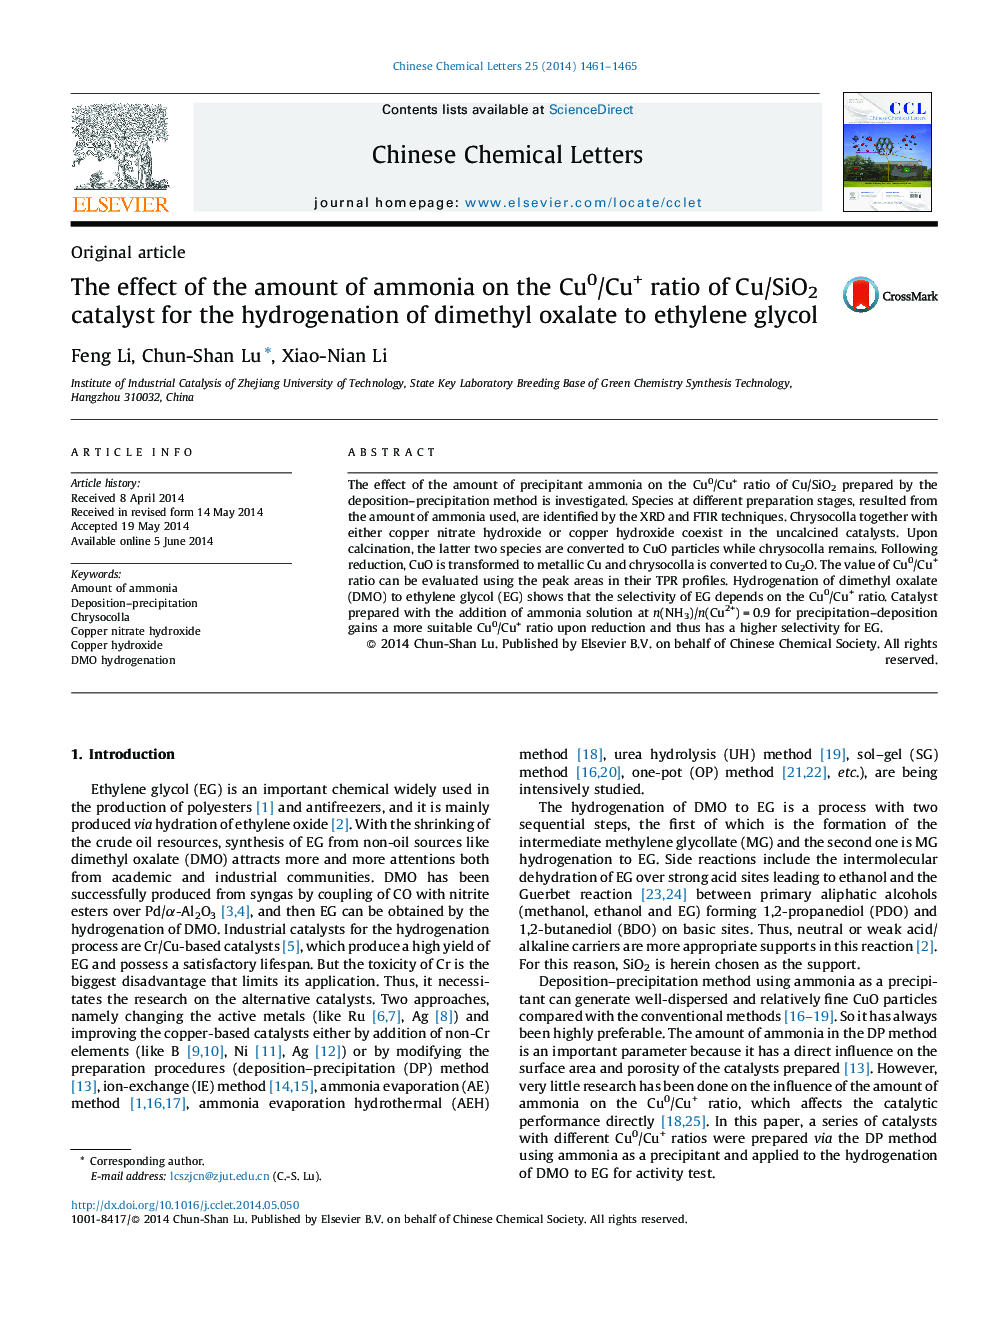 The effect of the amount of ammonia on the Cu0/Cu+ ratio of Cu/SiO2 catalyst for the hydrogenation of dimethyl oxalate to ethylene glycol